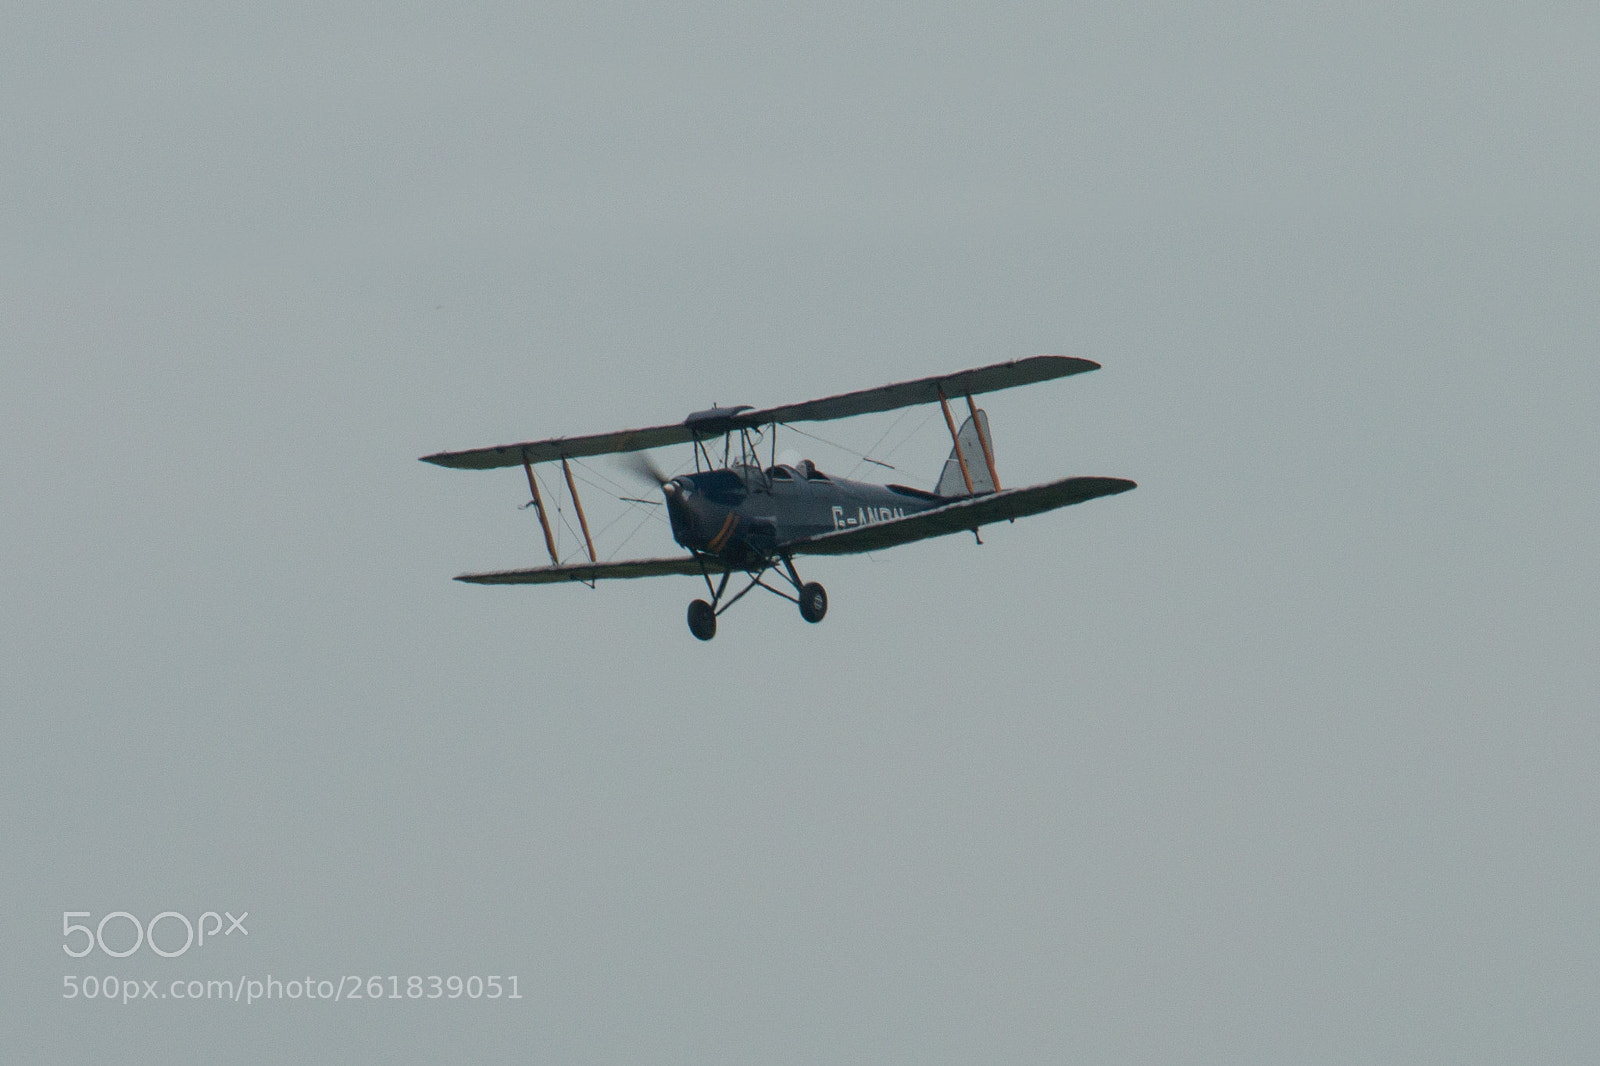 Canon EOS 70D sample photo. Tiger moth,  g-anrn (r-l) photography